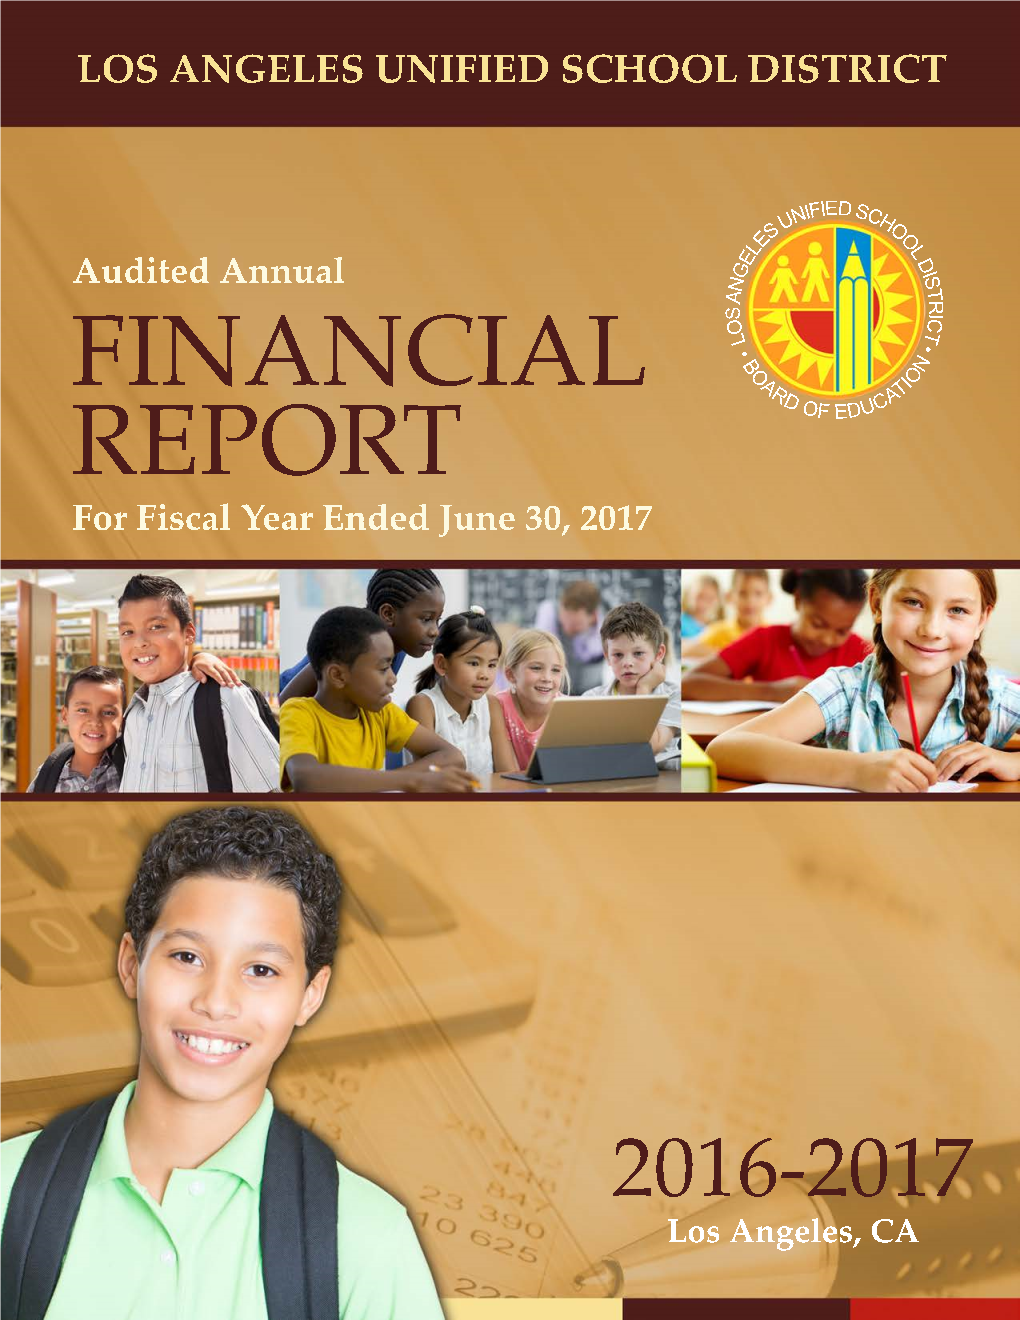 Audited Annual Financial Report Fiscal Year Ended June 30, 2017